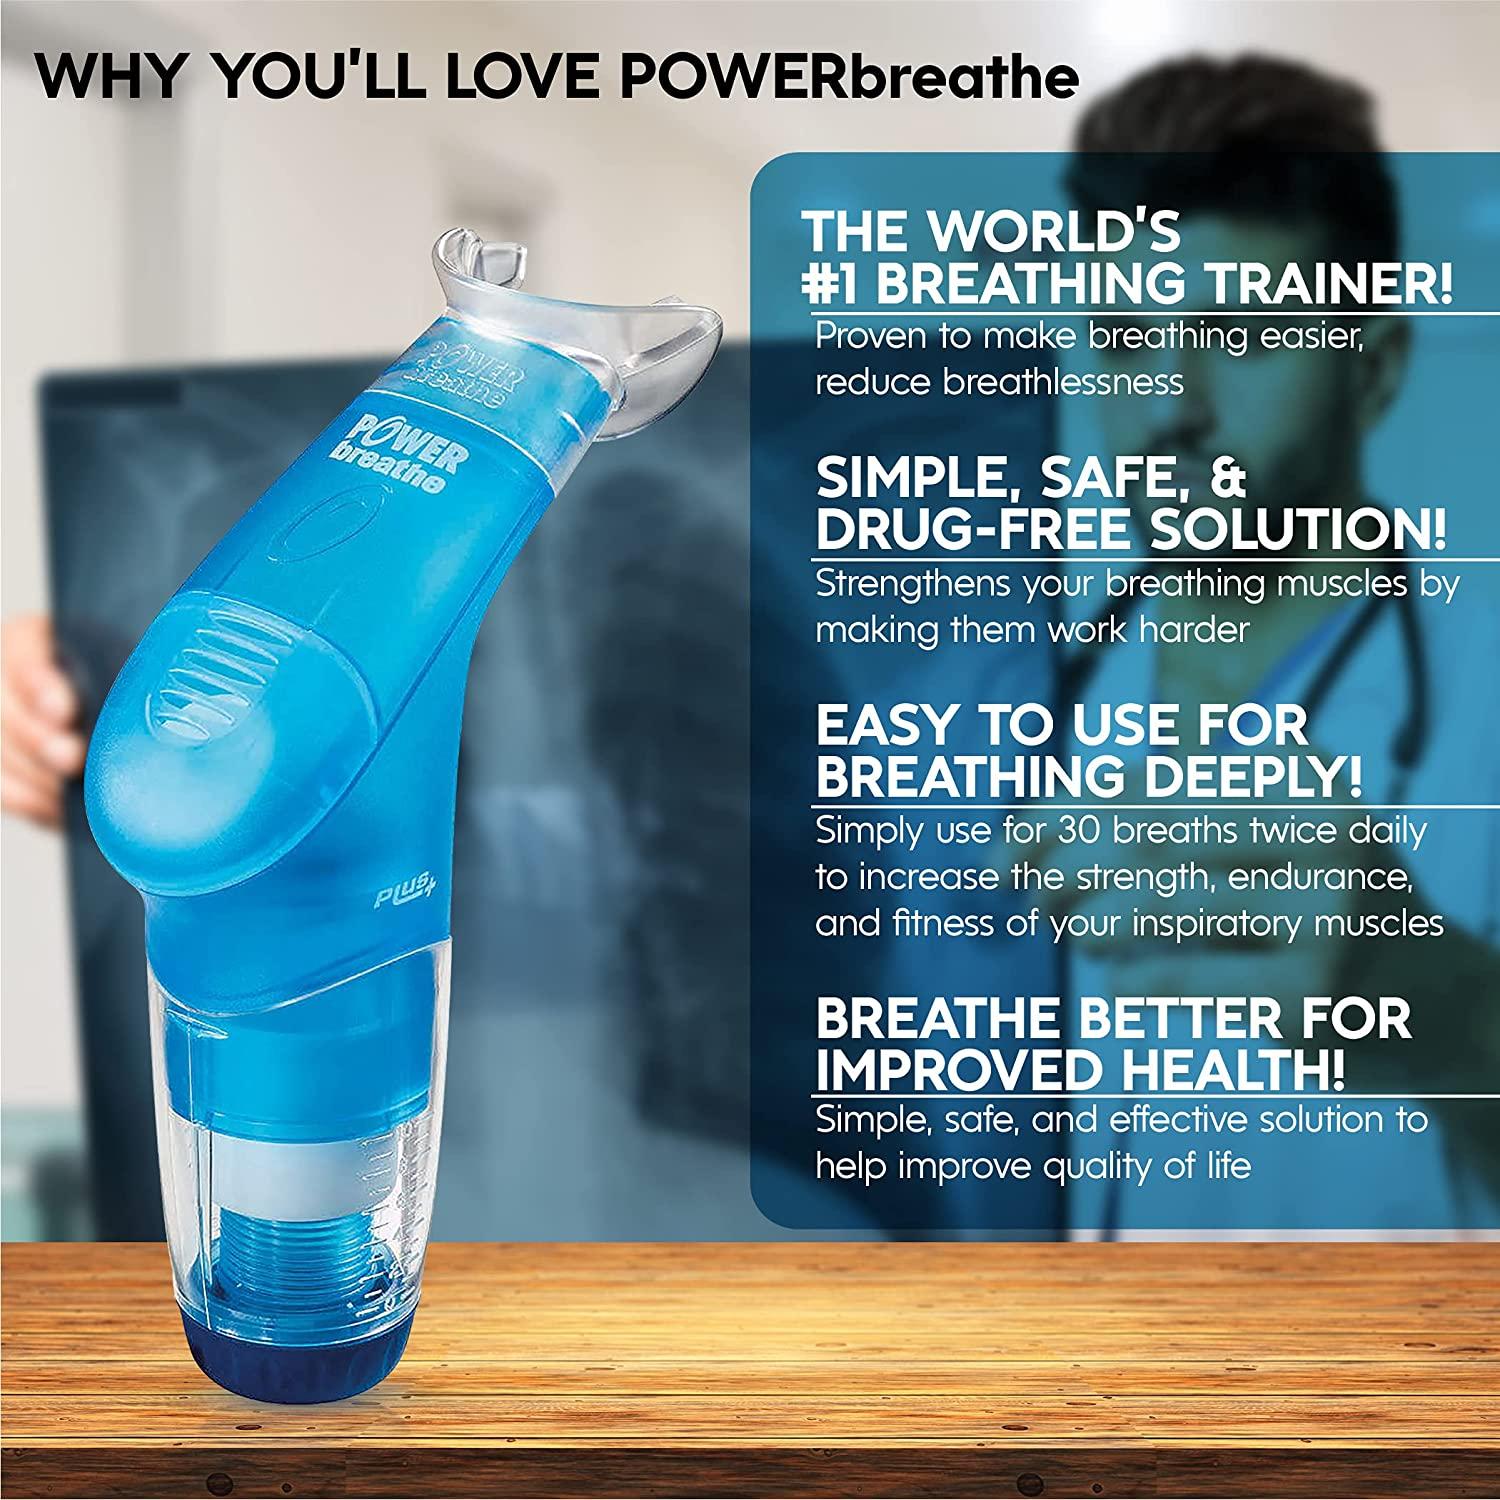 POWERbreathe - Breathing Exercise Device for Lungs, Breathing Trainer and  Therapy Tool to Strengthen Breathing Muscles and Help Lung Capacity,  Inspiratory Muscle Trainer - Blue, Medium Resistance